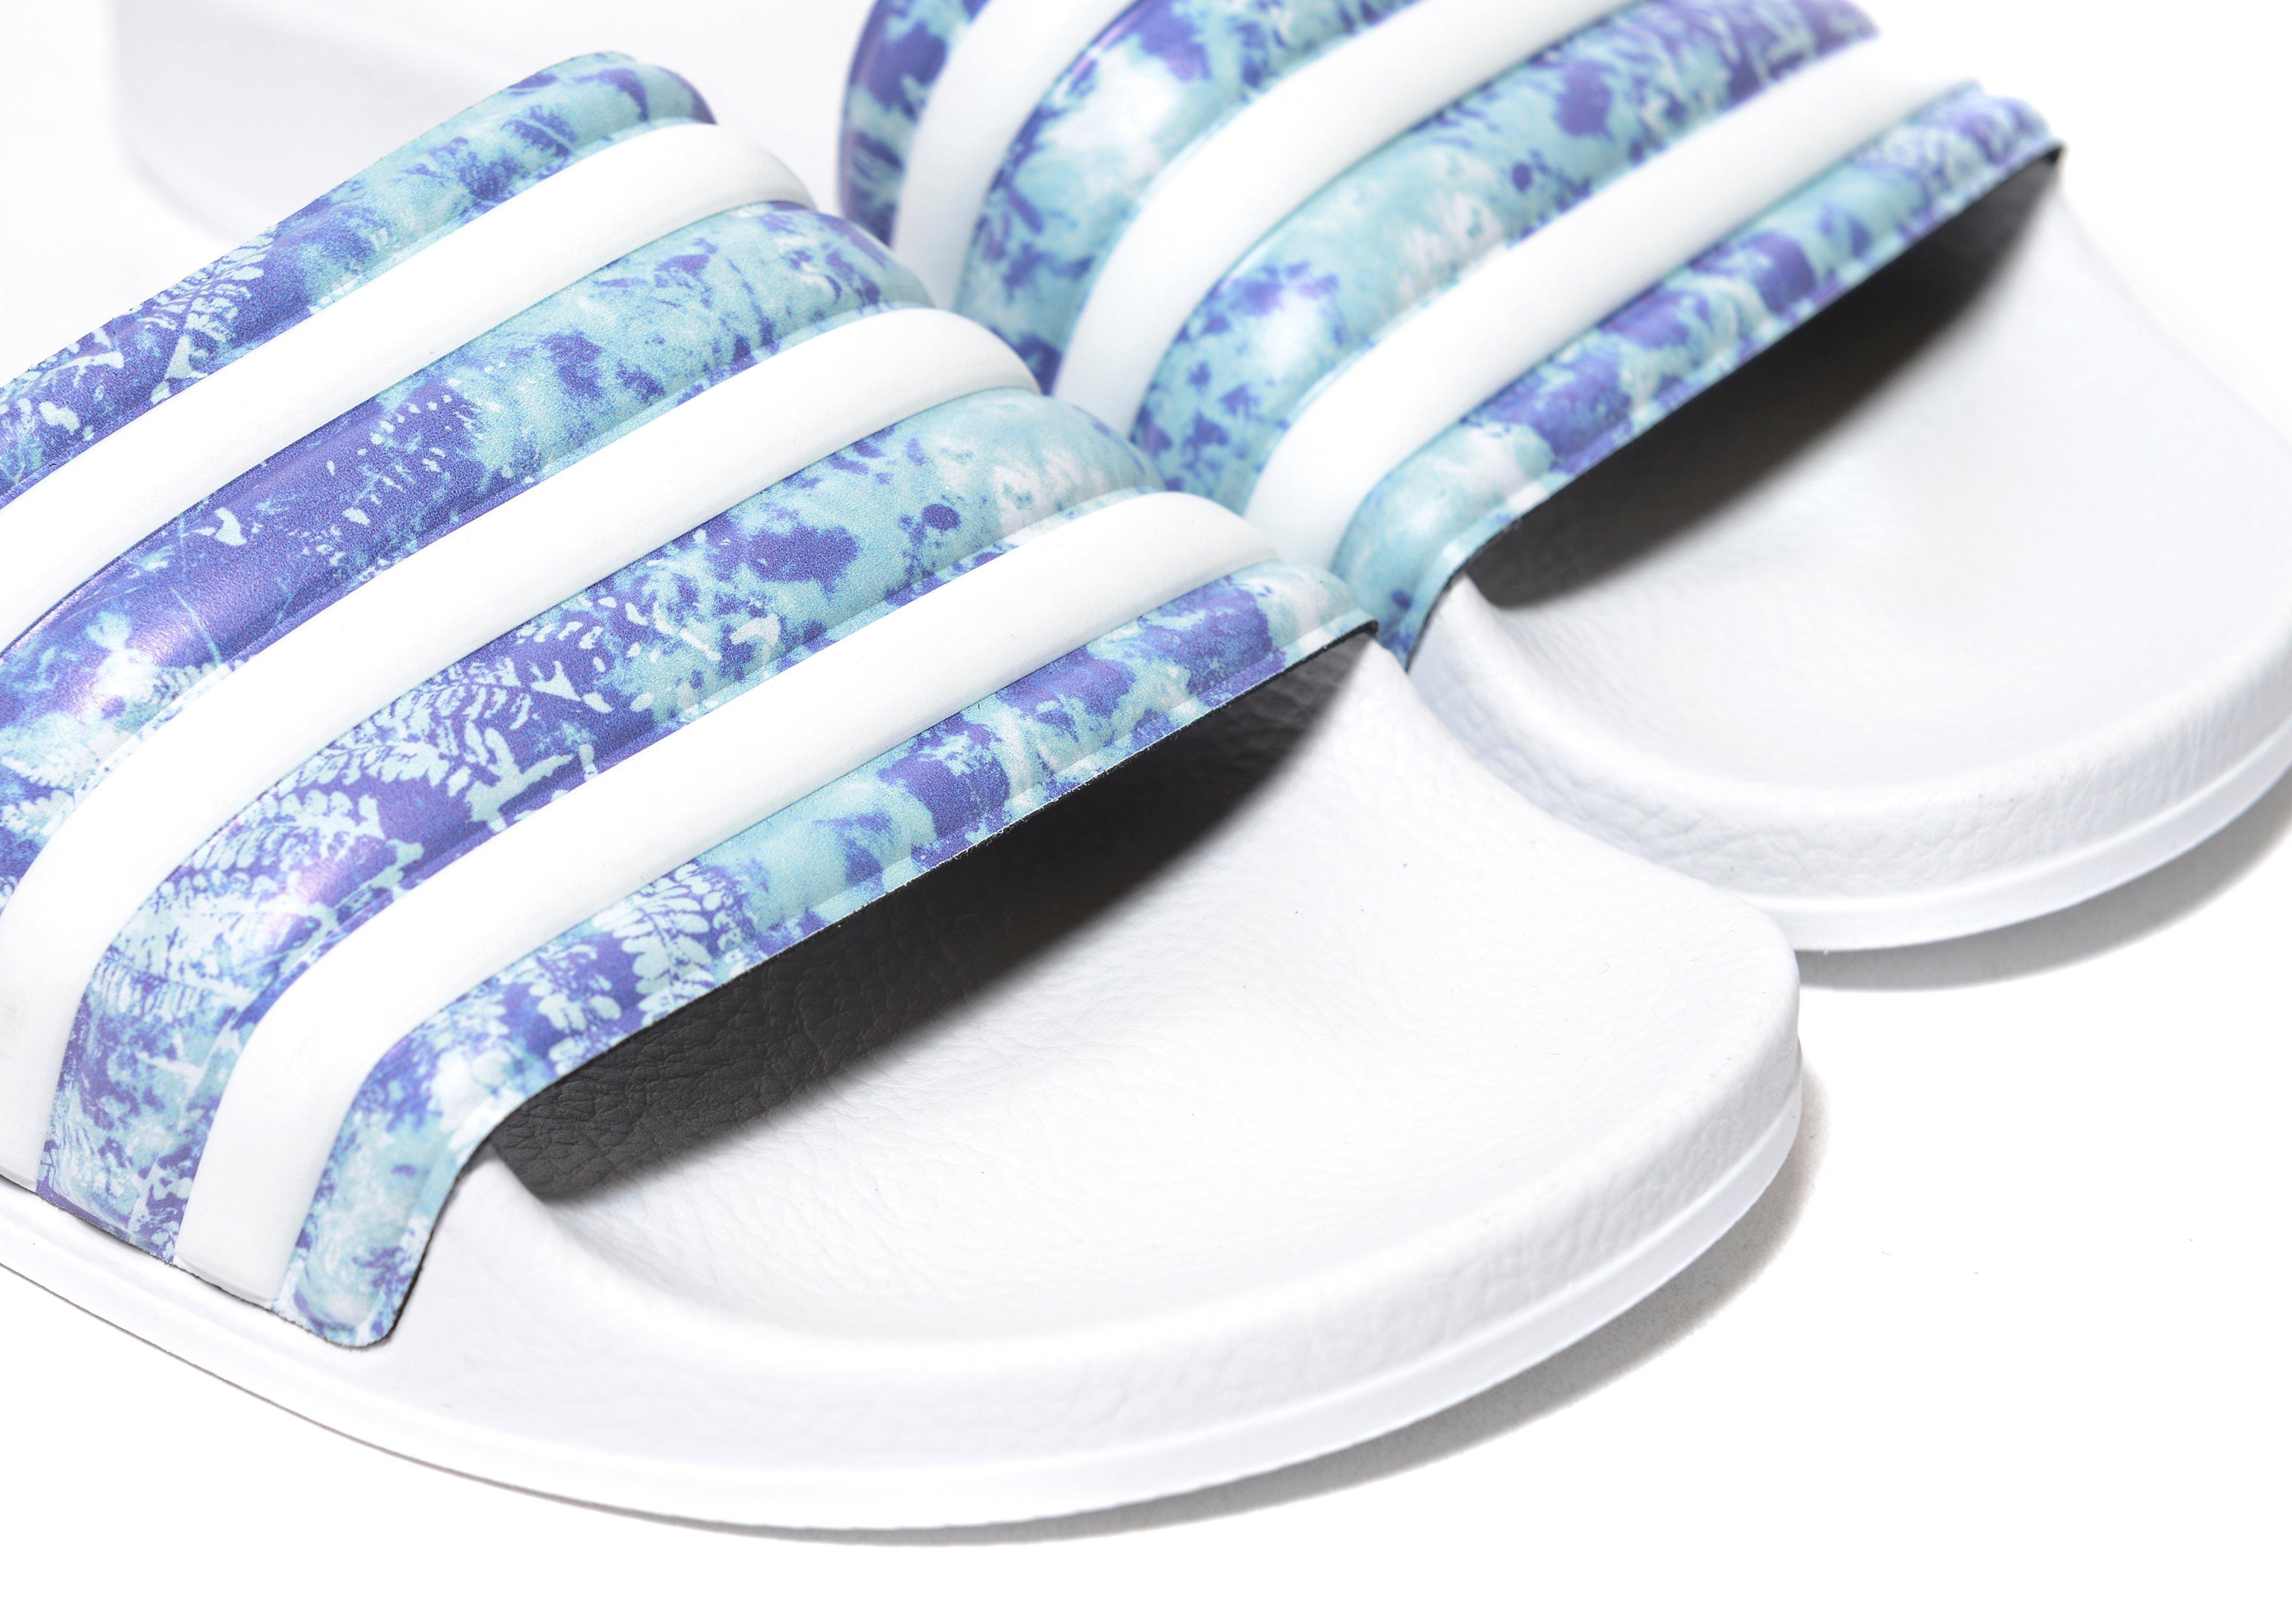  adidas  Originals Synthetic Adilette  Slides  in White Floral  